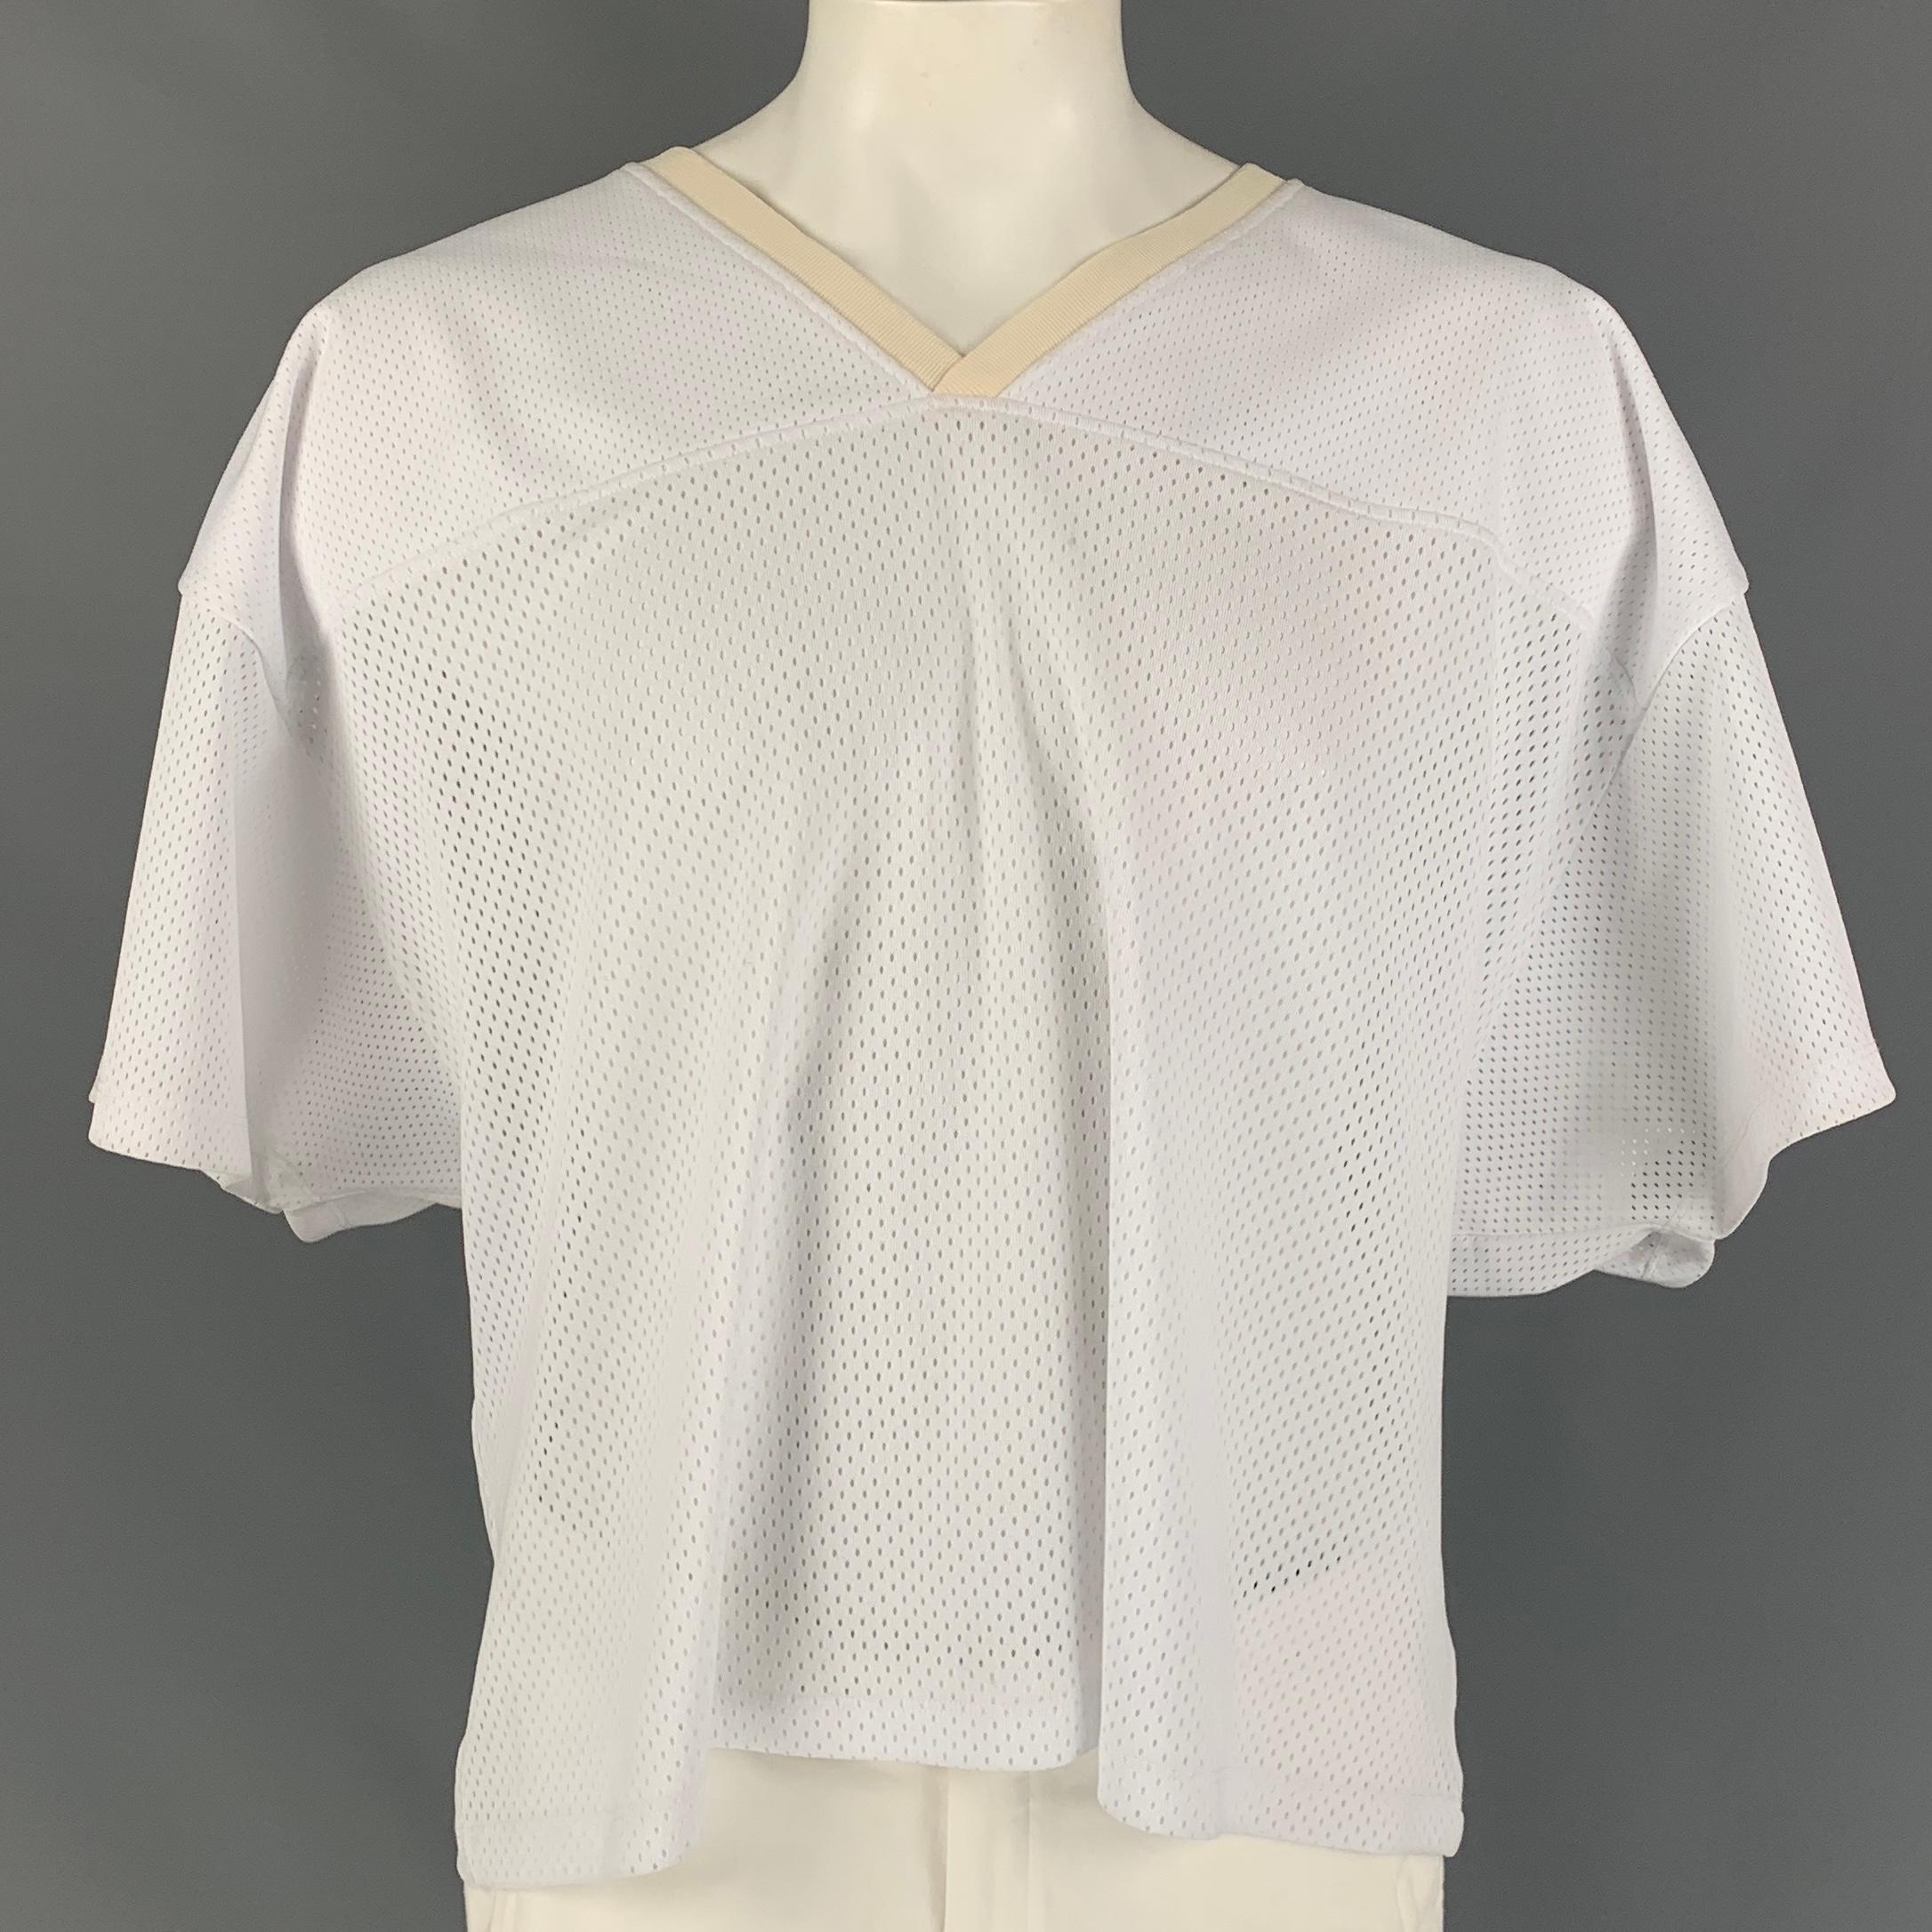 FEAR OF GOD 'MANUEL' Fifth Collection jersey t-shirt comes in a white mesh polyester / silk featuring a oversized fit, back logo detail, and a ribbed v-neck. Made in USA.

Very Good Pre-Owned Condition.
Marked: L/XL

Measurements:

Shoulder: 29